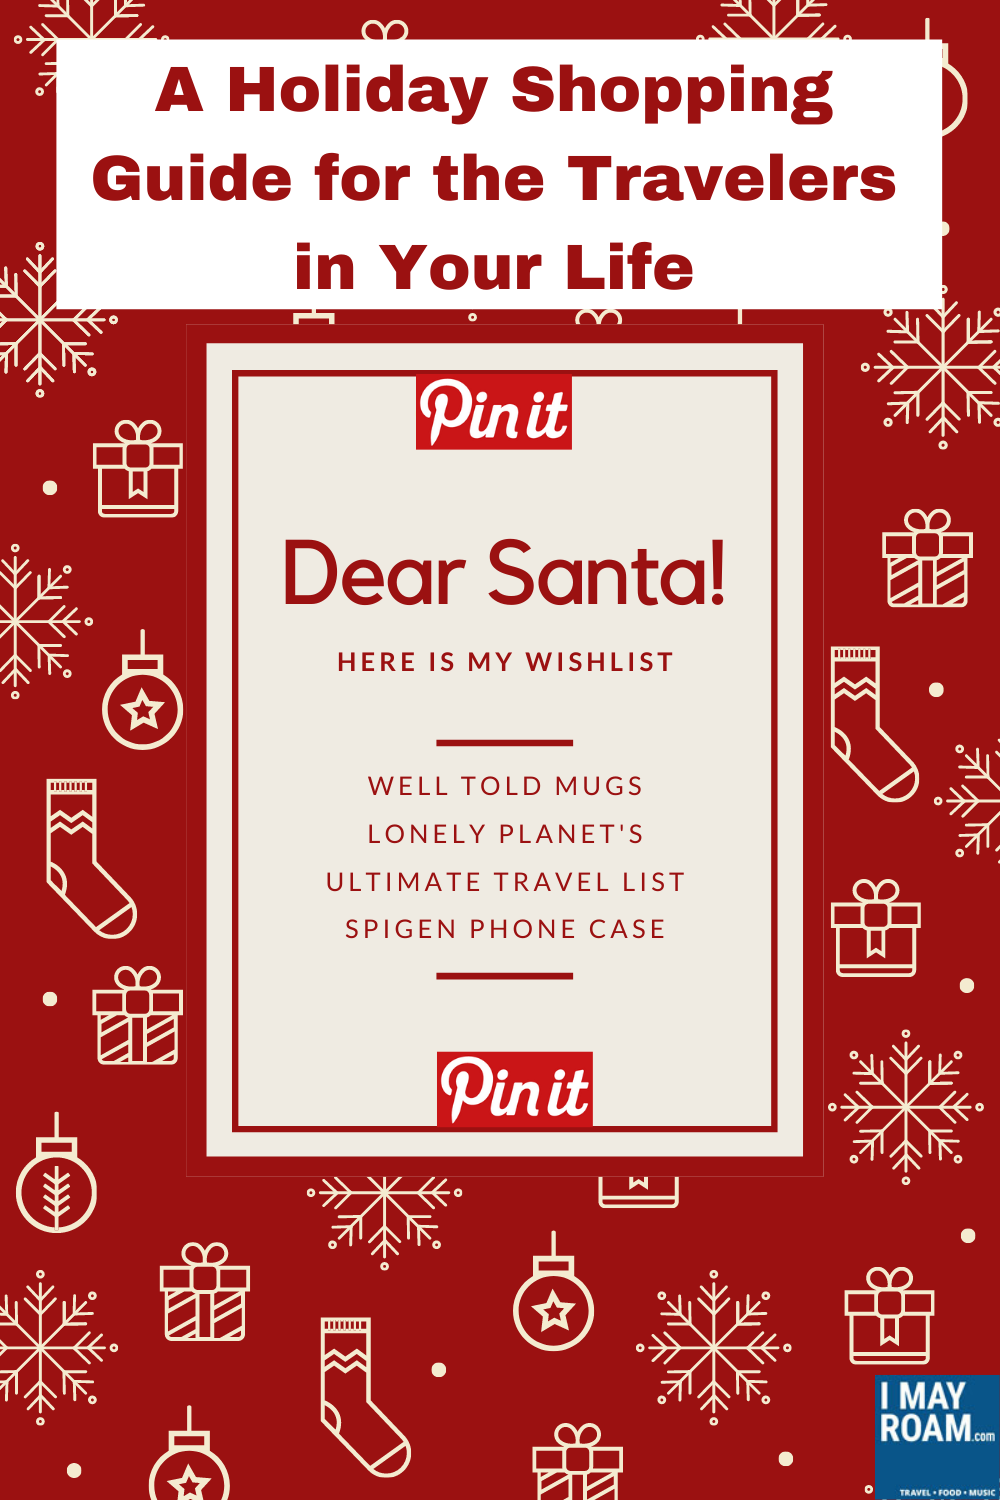 Pinterest A Holiday Shopping Guide for the Travelers in Your Life